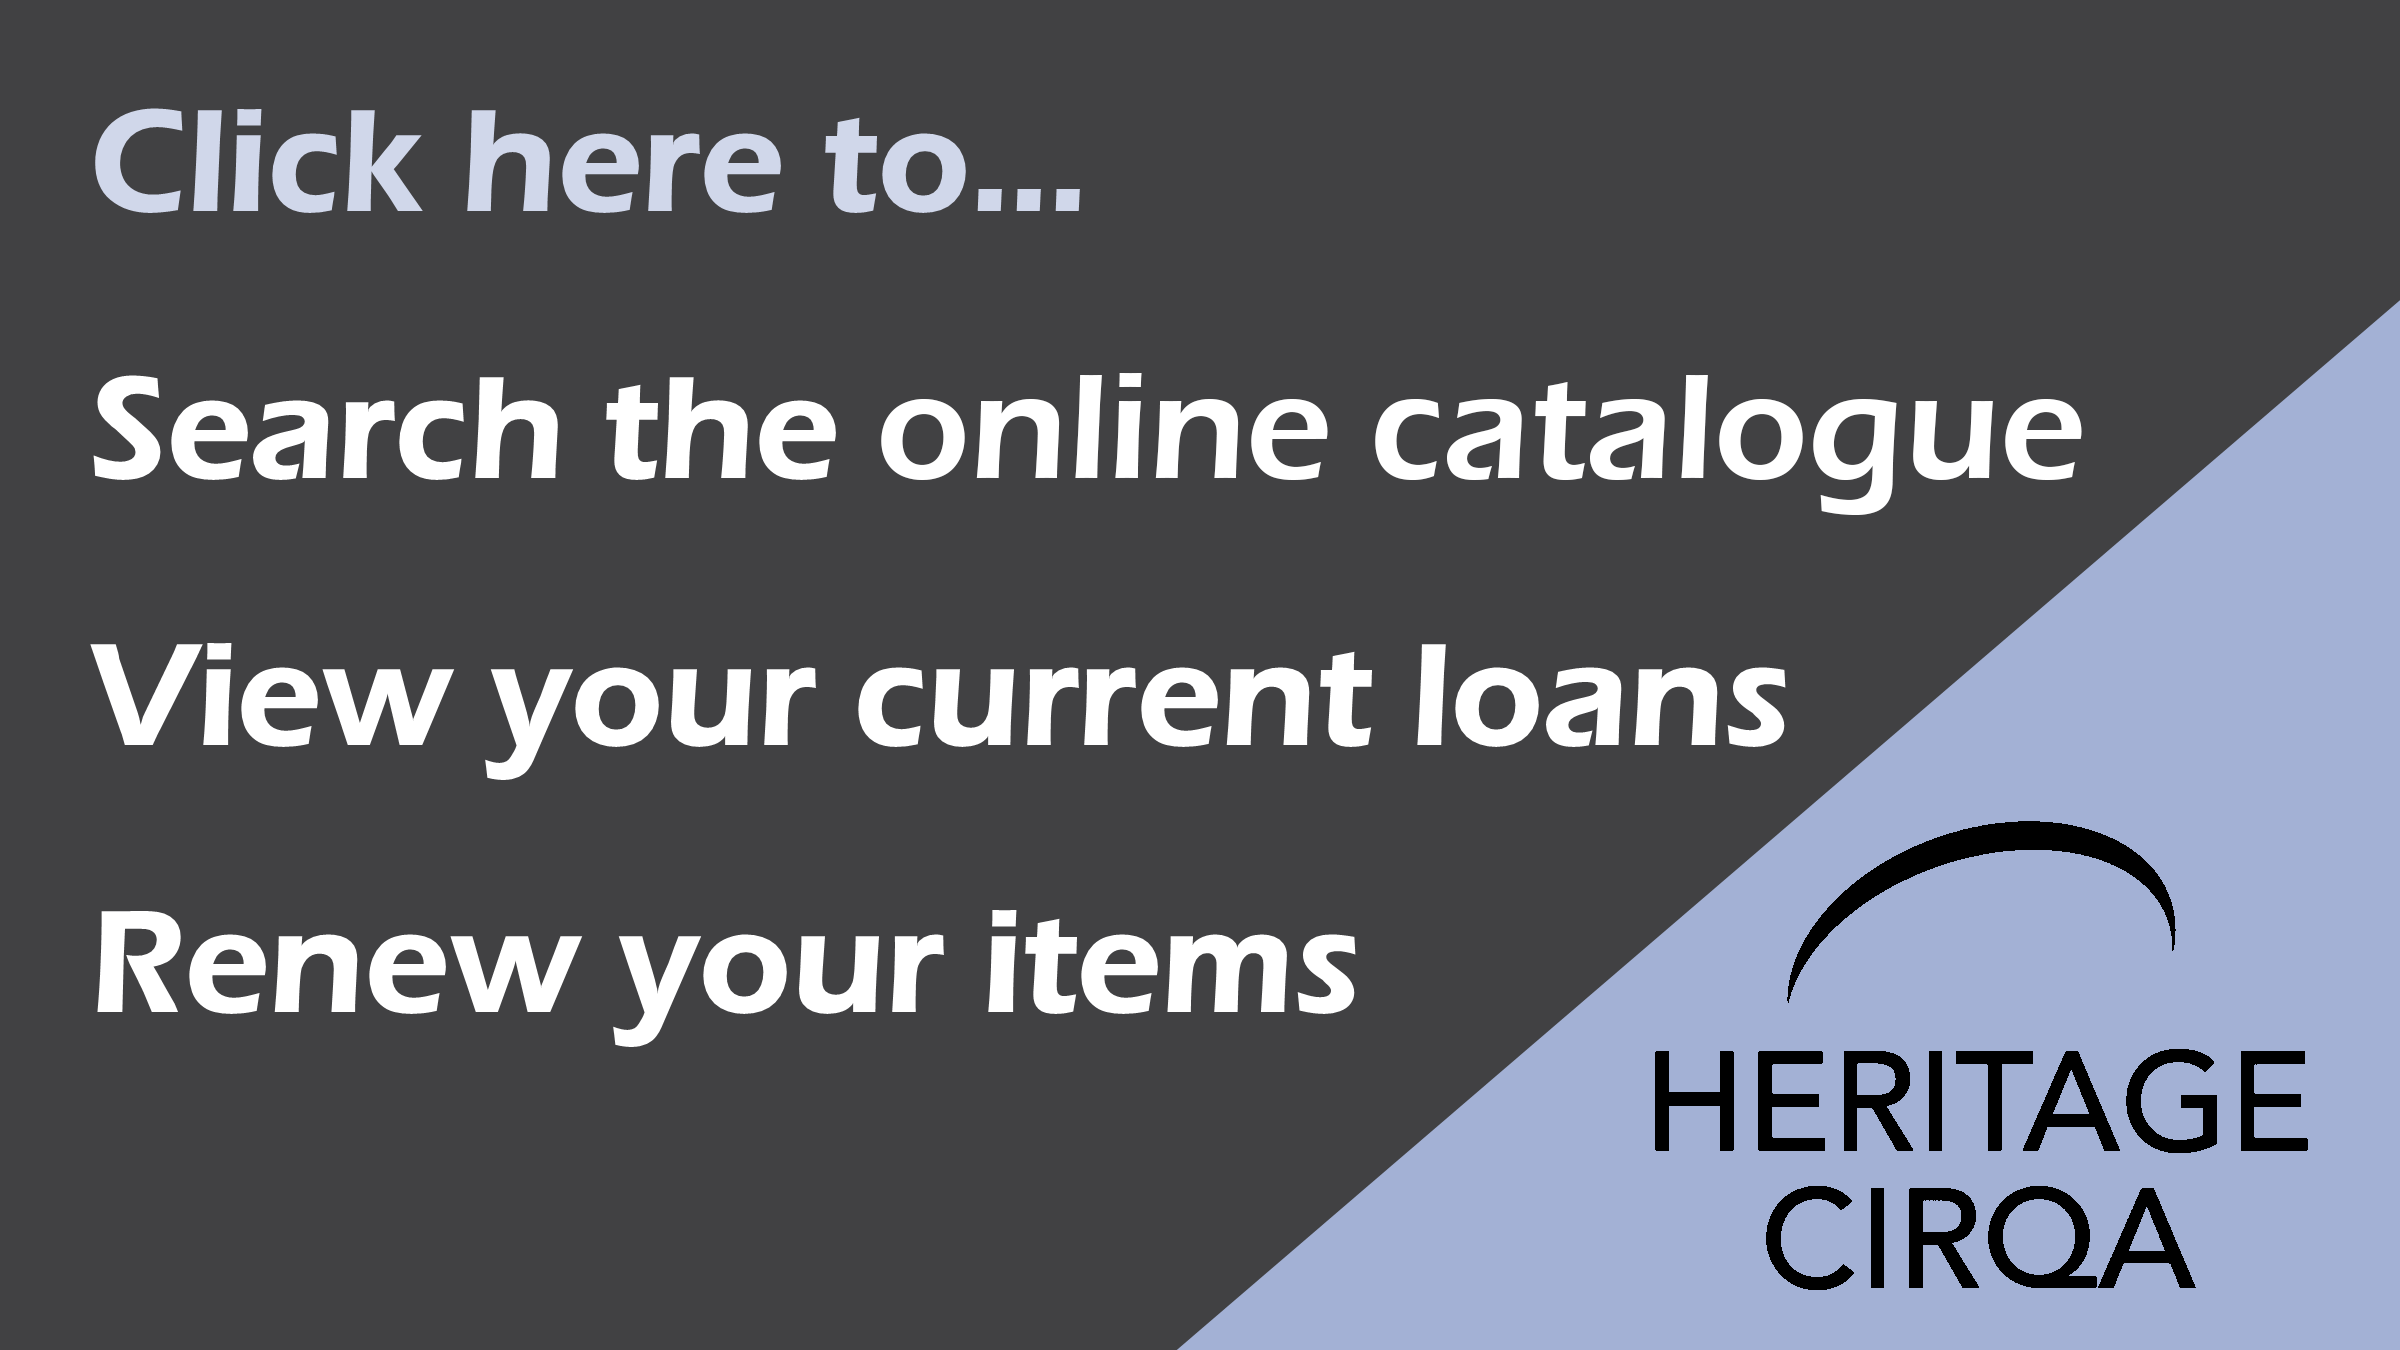 Search the online catalogue, view your current loans, renew your items.